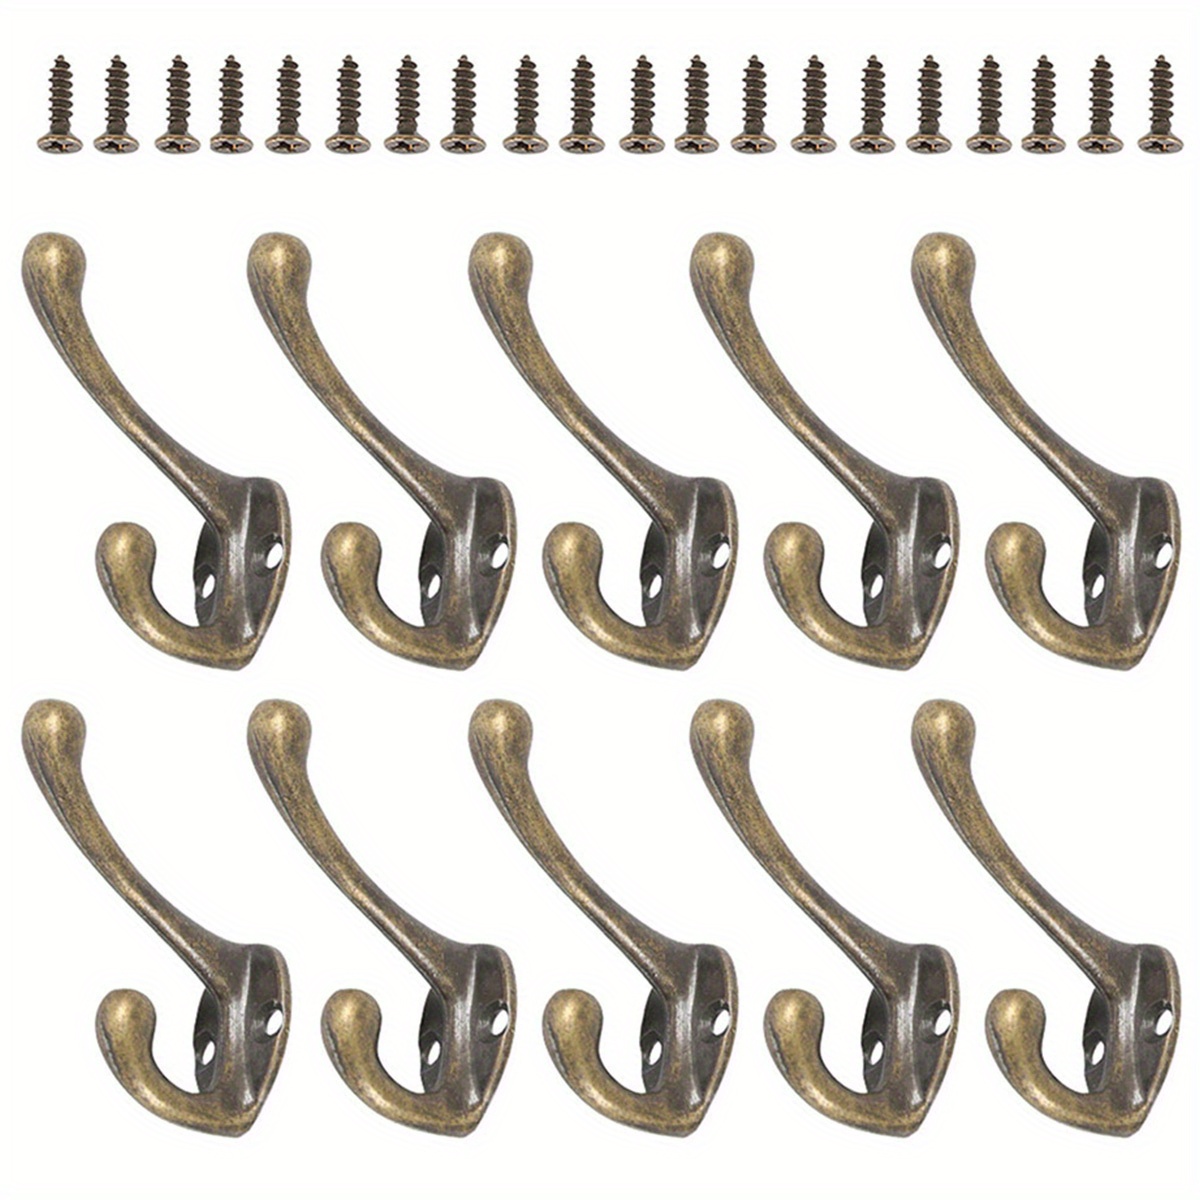 10pcs Hooks With Screws Vintage Storage Rack Wall Hooks For Home